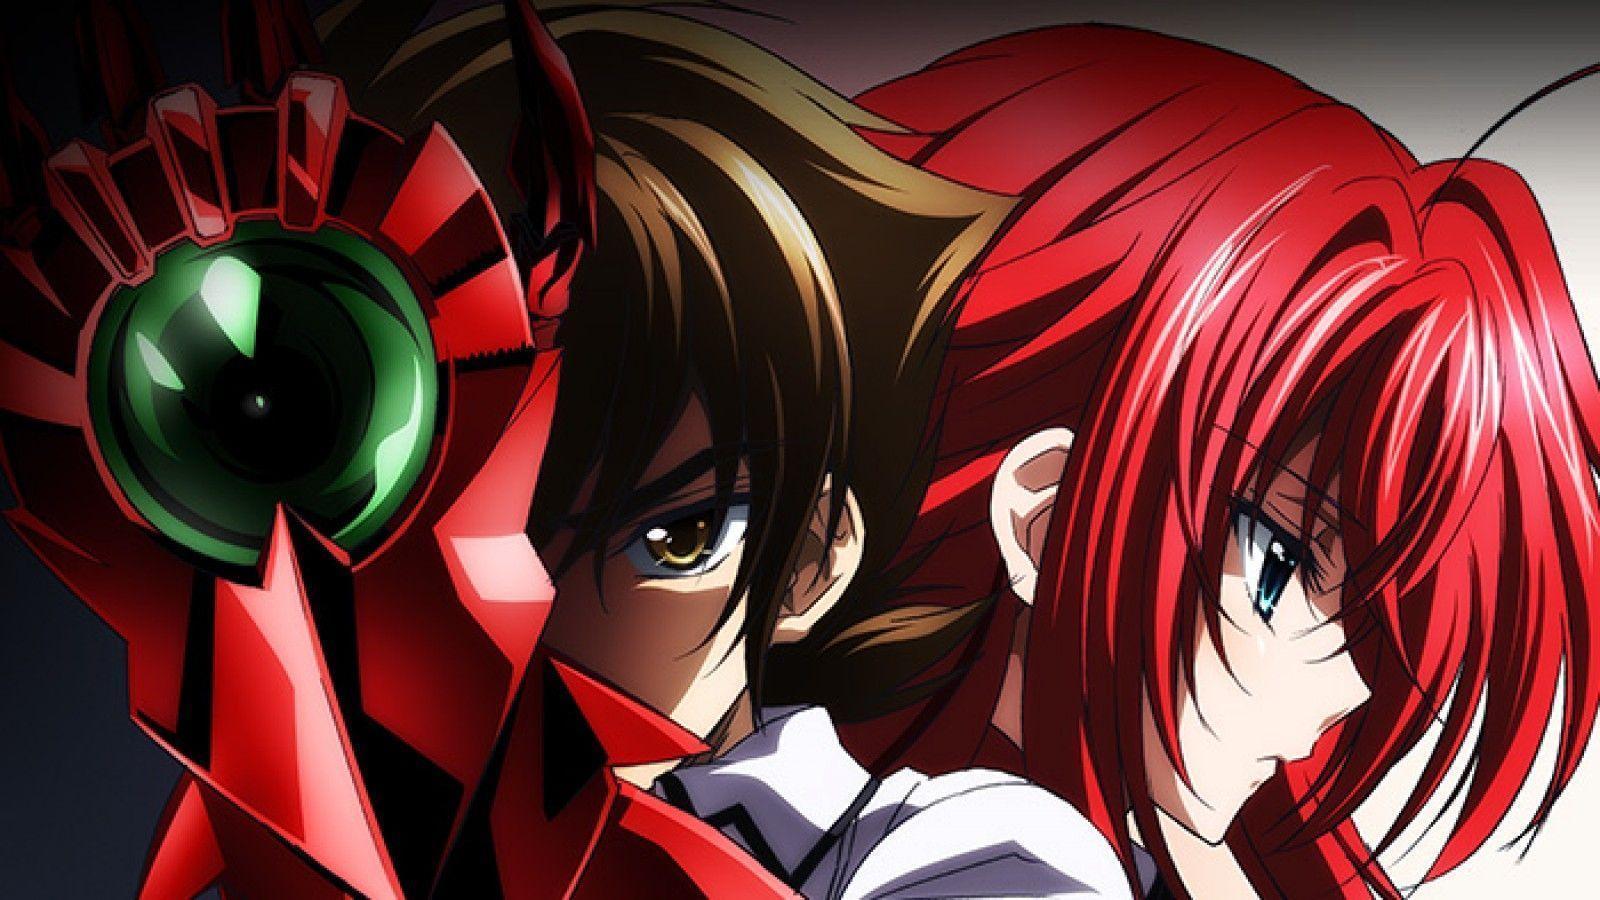 Rias Gremory HD iPhone Wallpapers - Wallpaper Cave